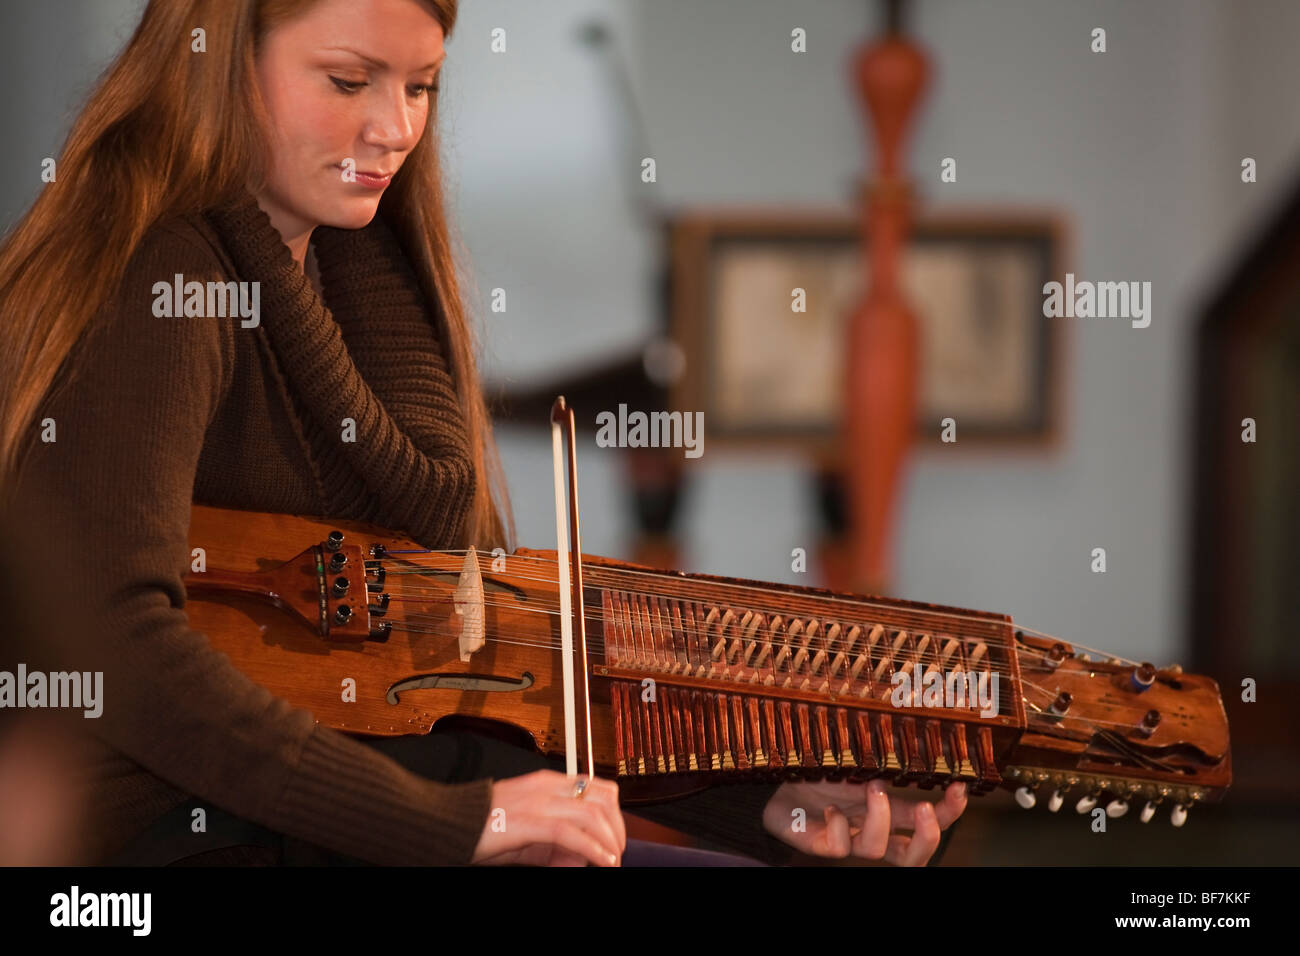 musician violinist string player keyed fiddle nyckelharpa Stock Photo